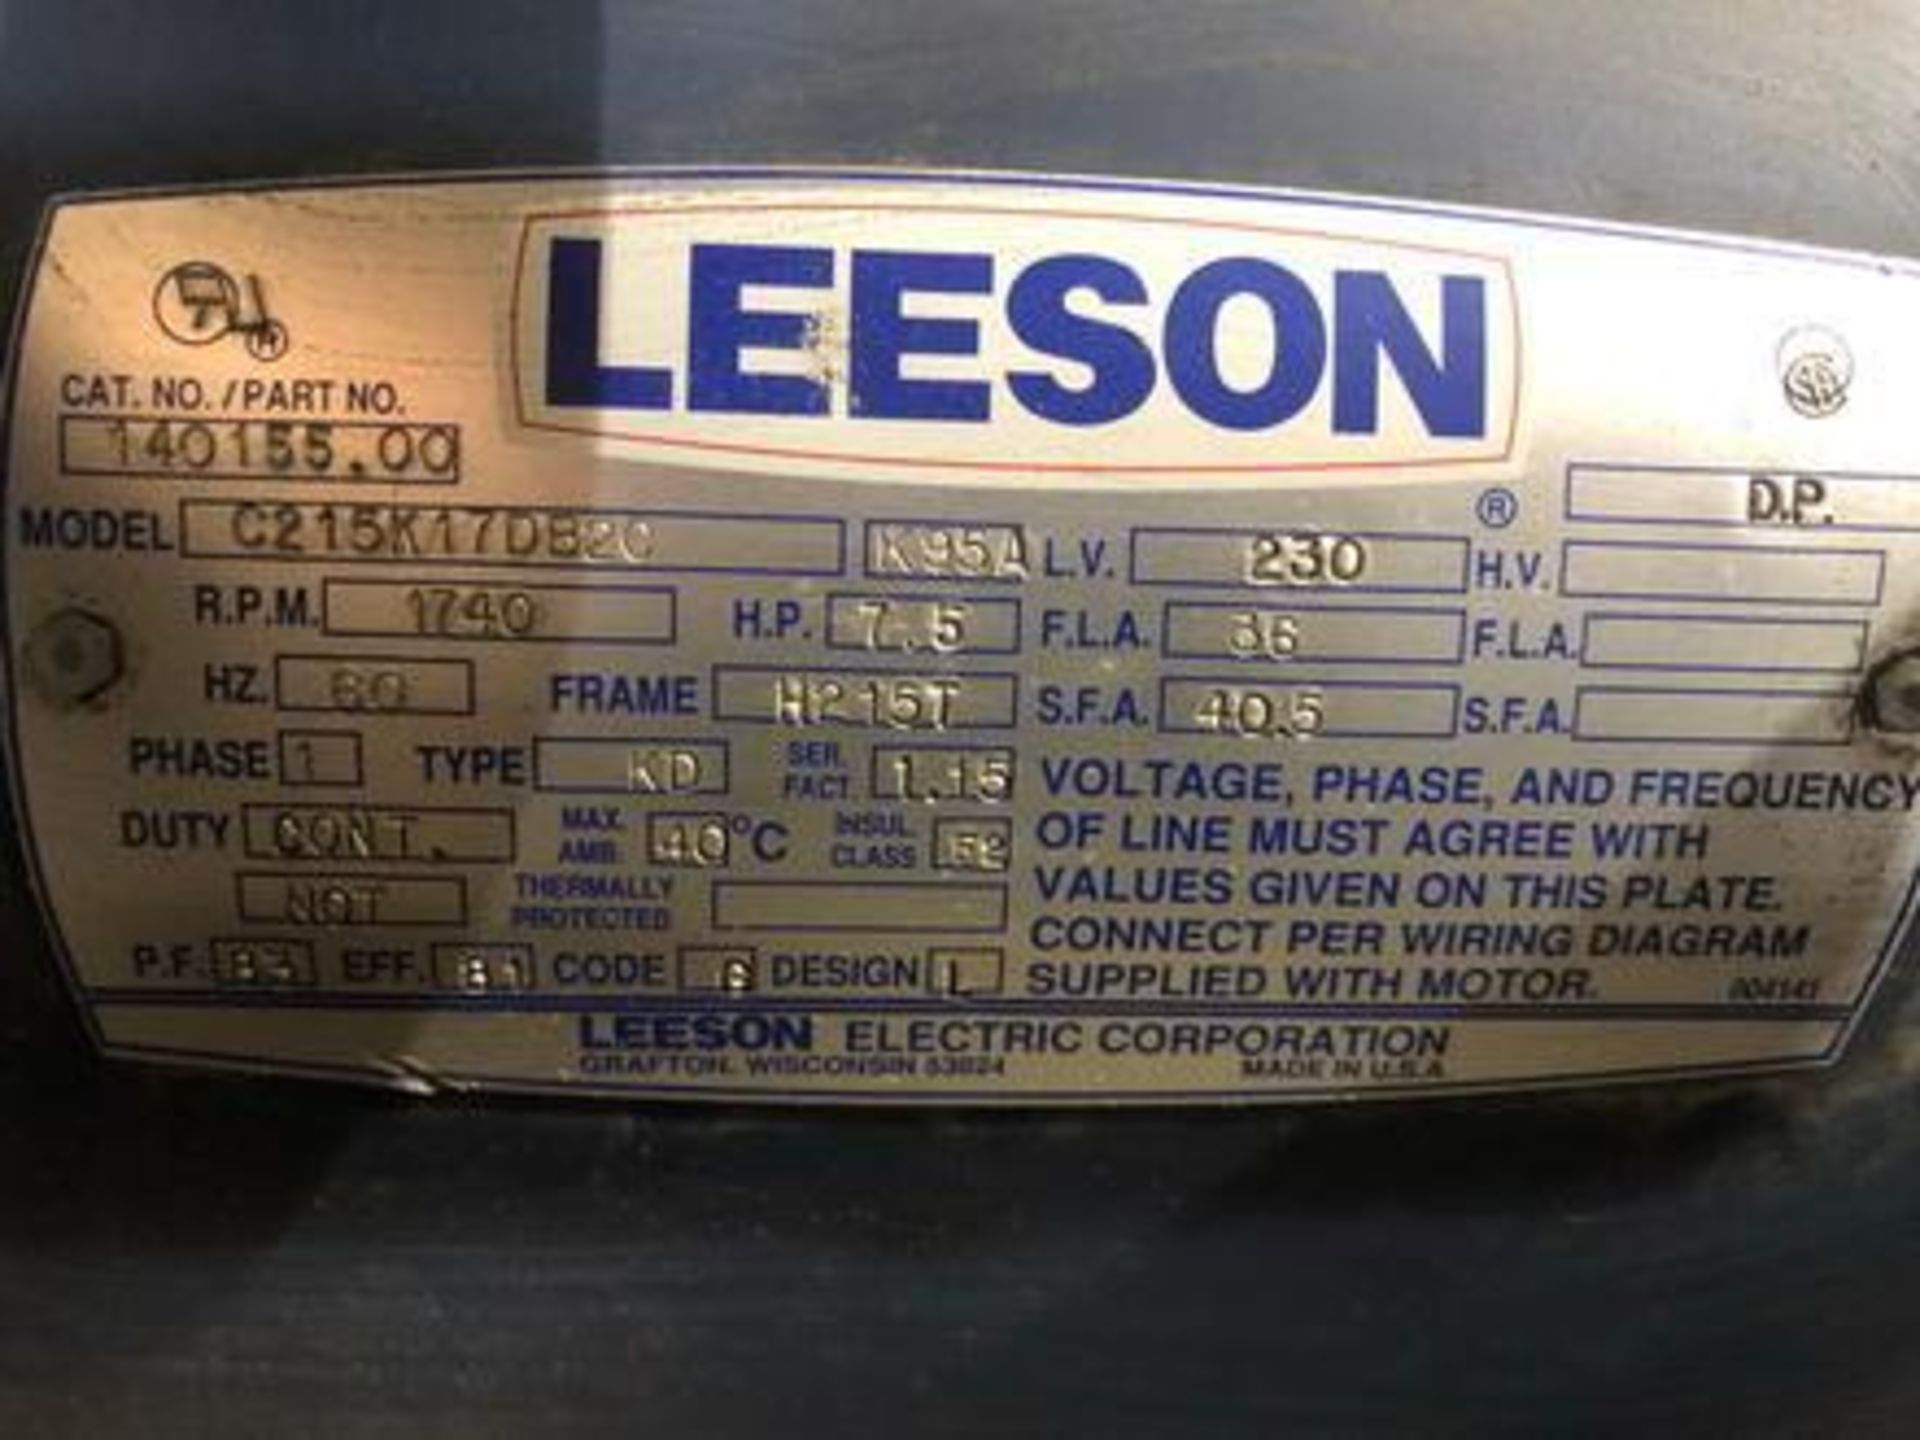 Leeson Air Compressor Model: C215K17DB20, Phase 01, Rpm 1740, H.P 7.5, Type KD - Image 2 of 8